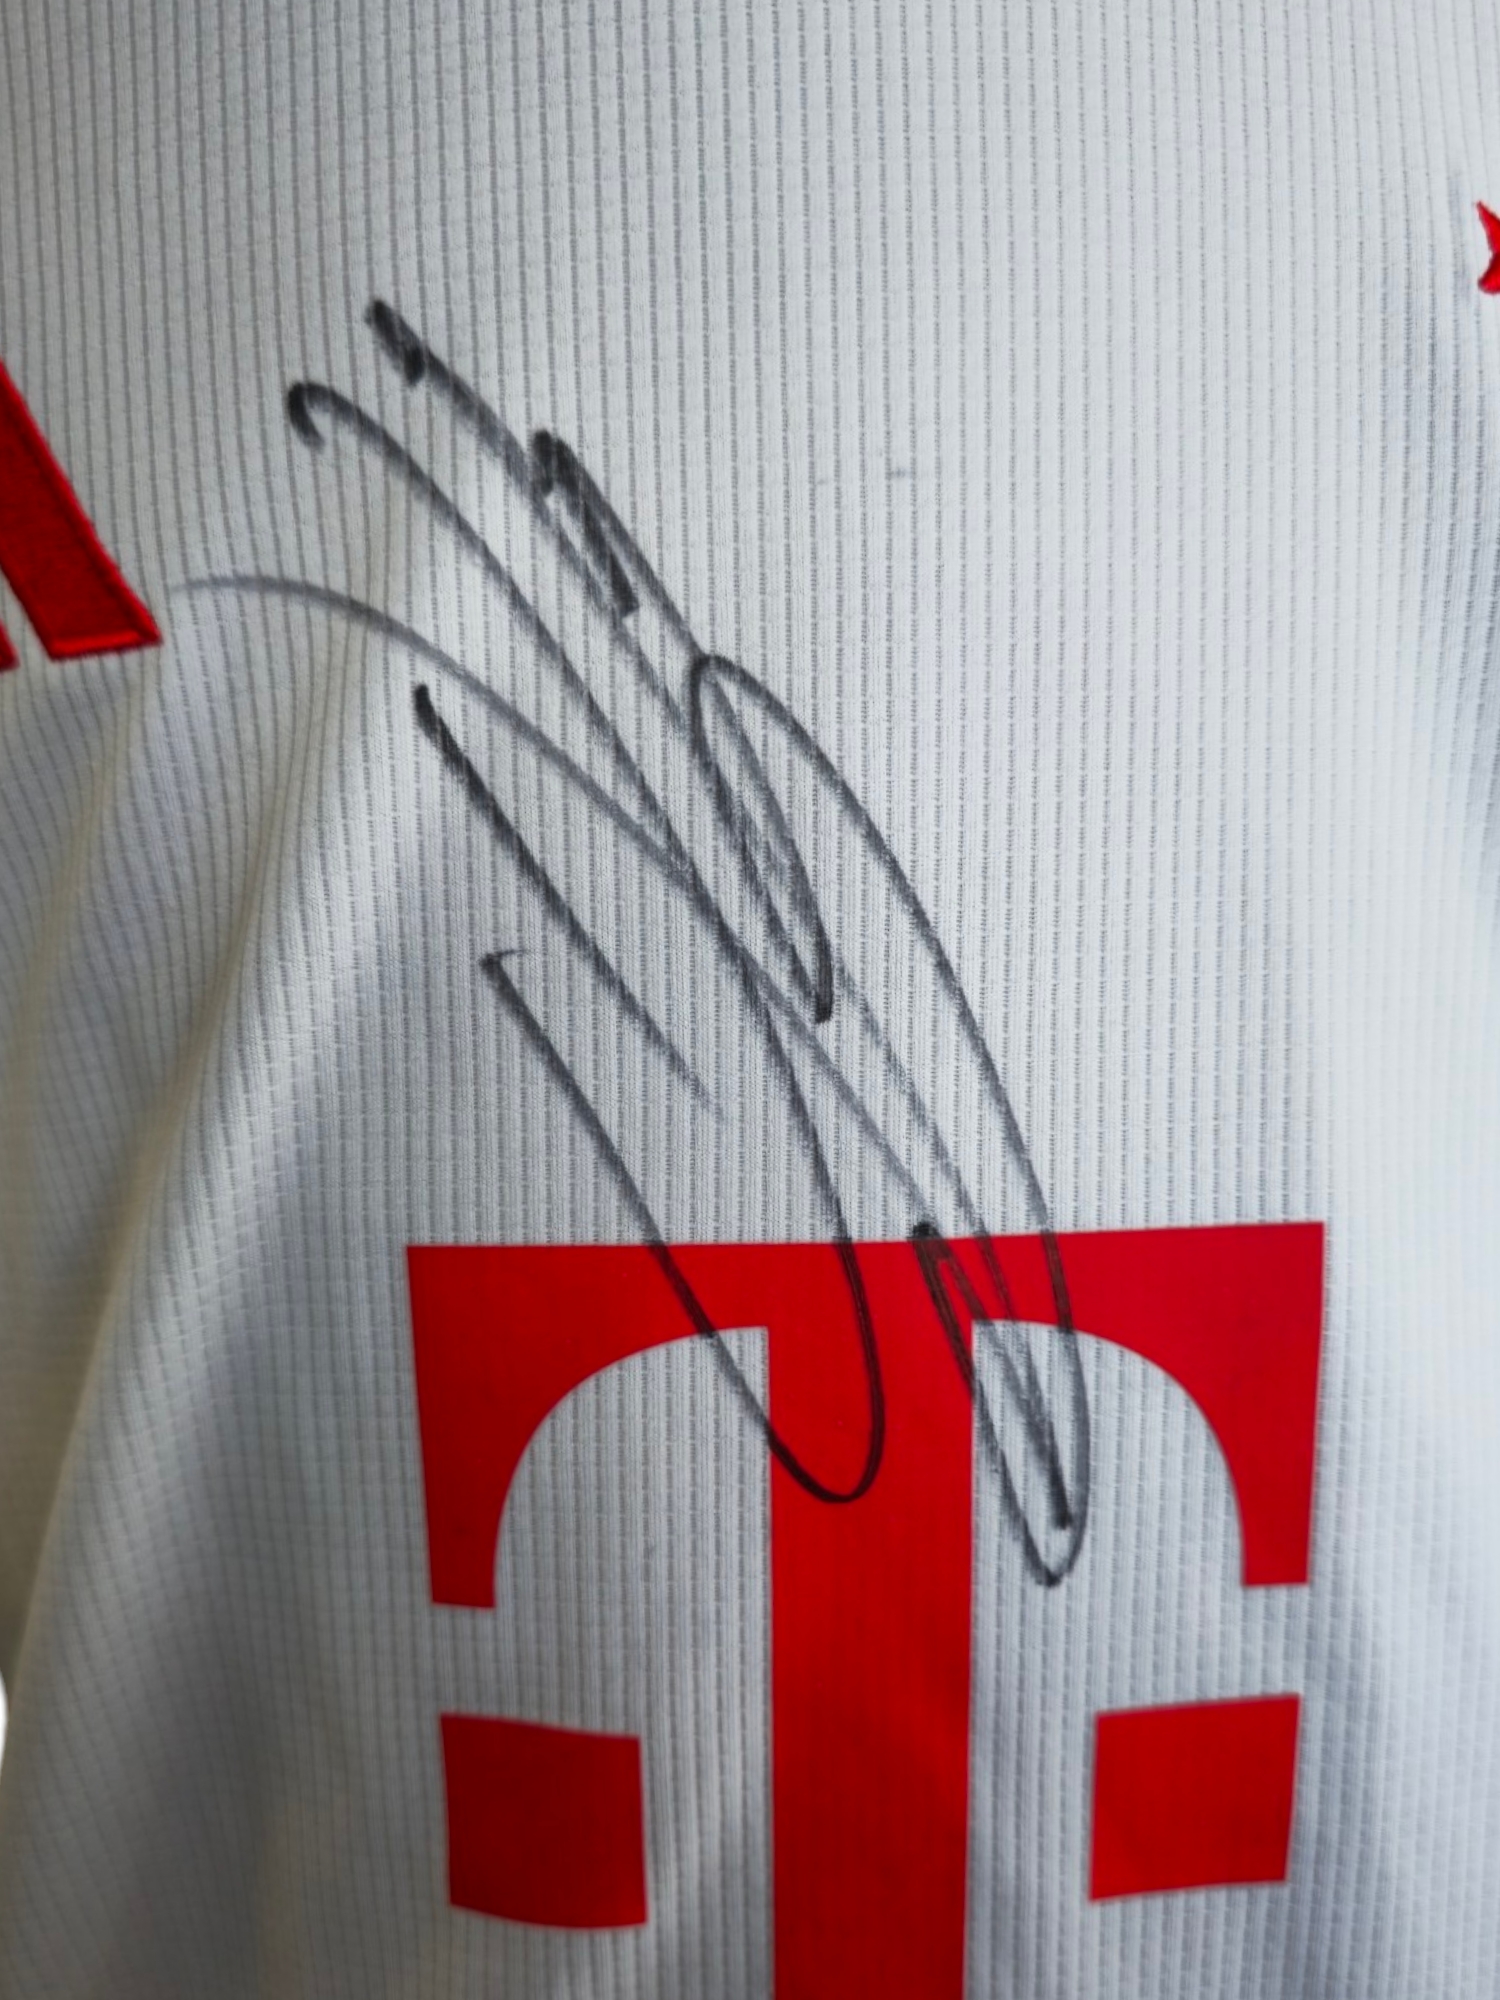 Alphonso Davies signed Bayern Munich men's shirt Adidas size medium with tags. Good Condition. All - Image 2 of 2